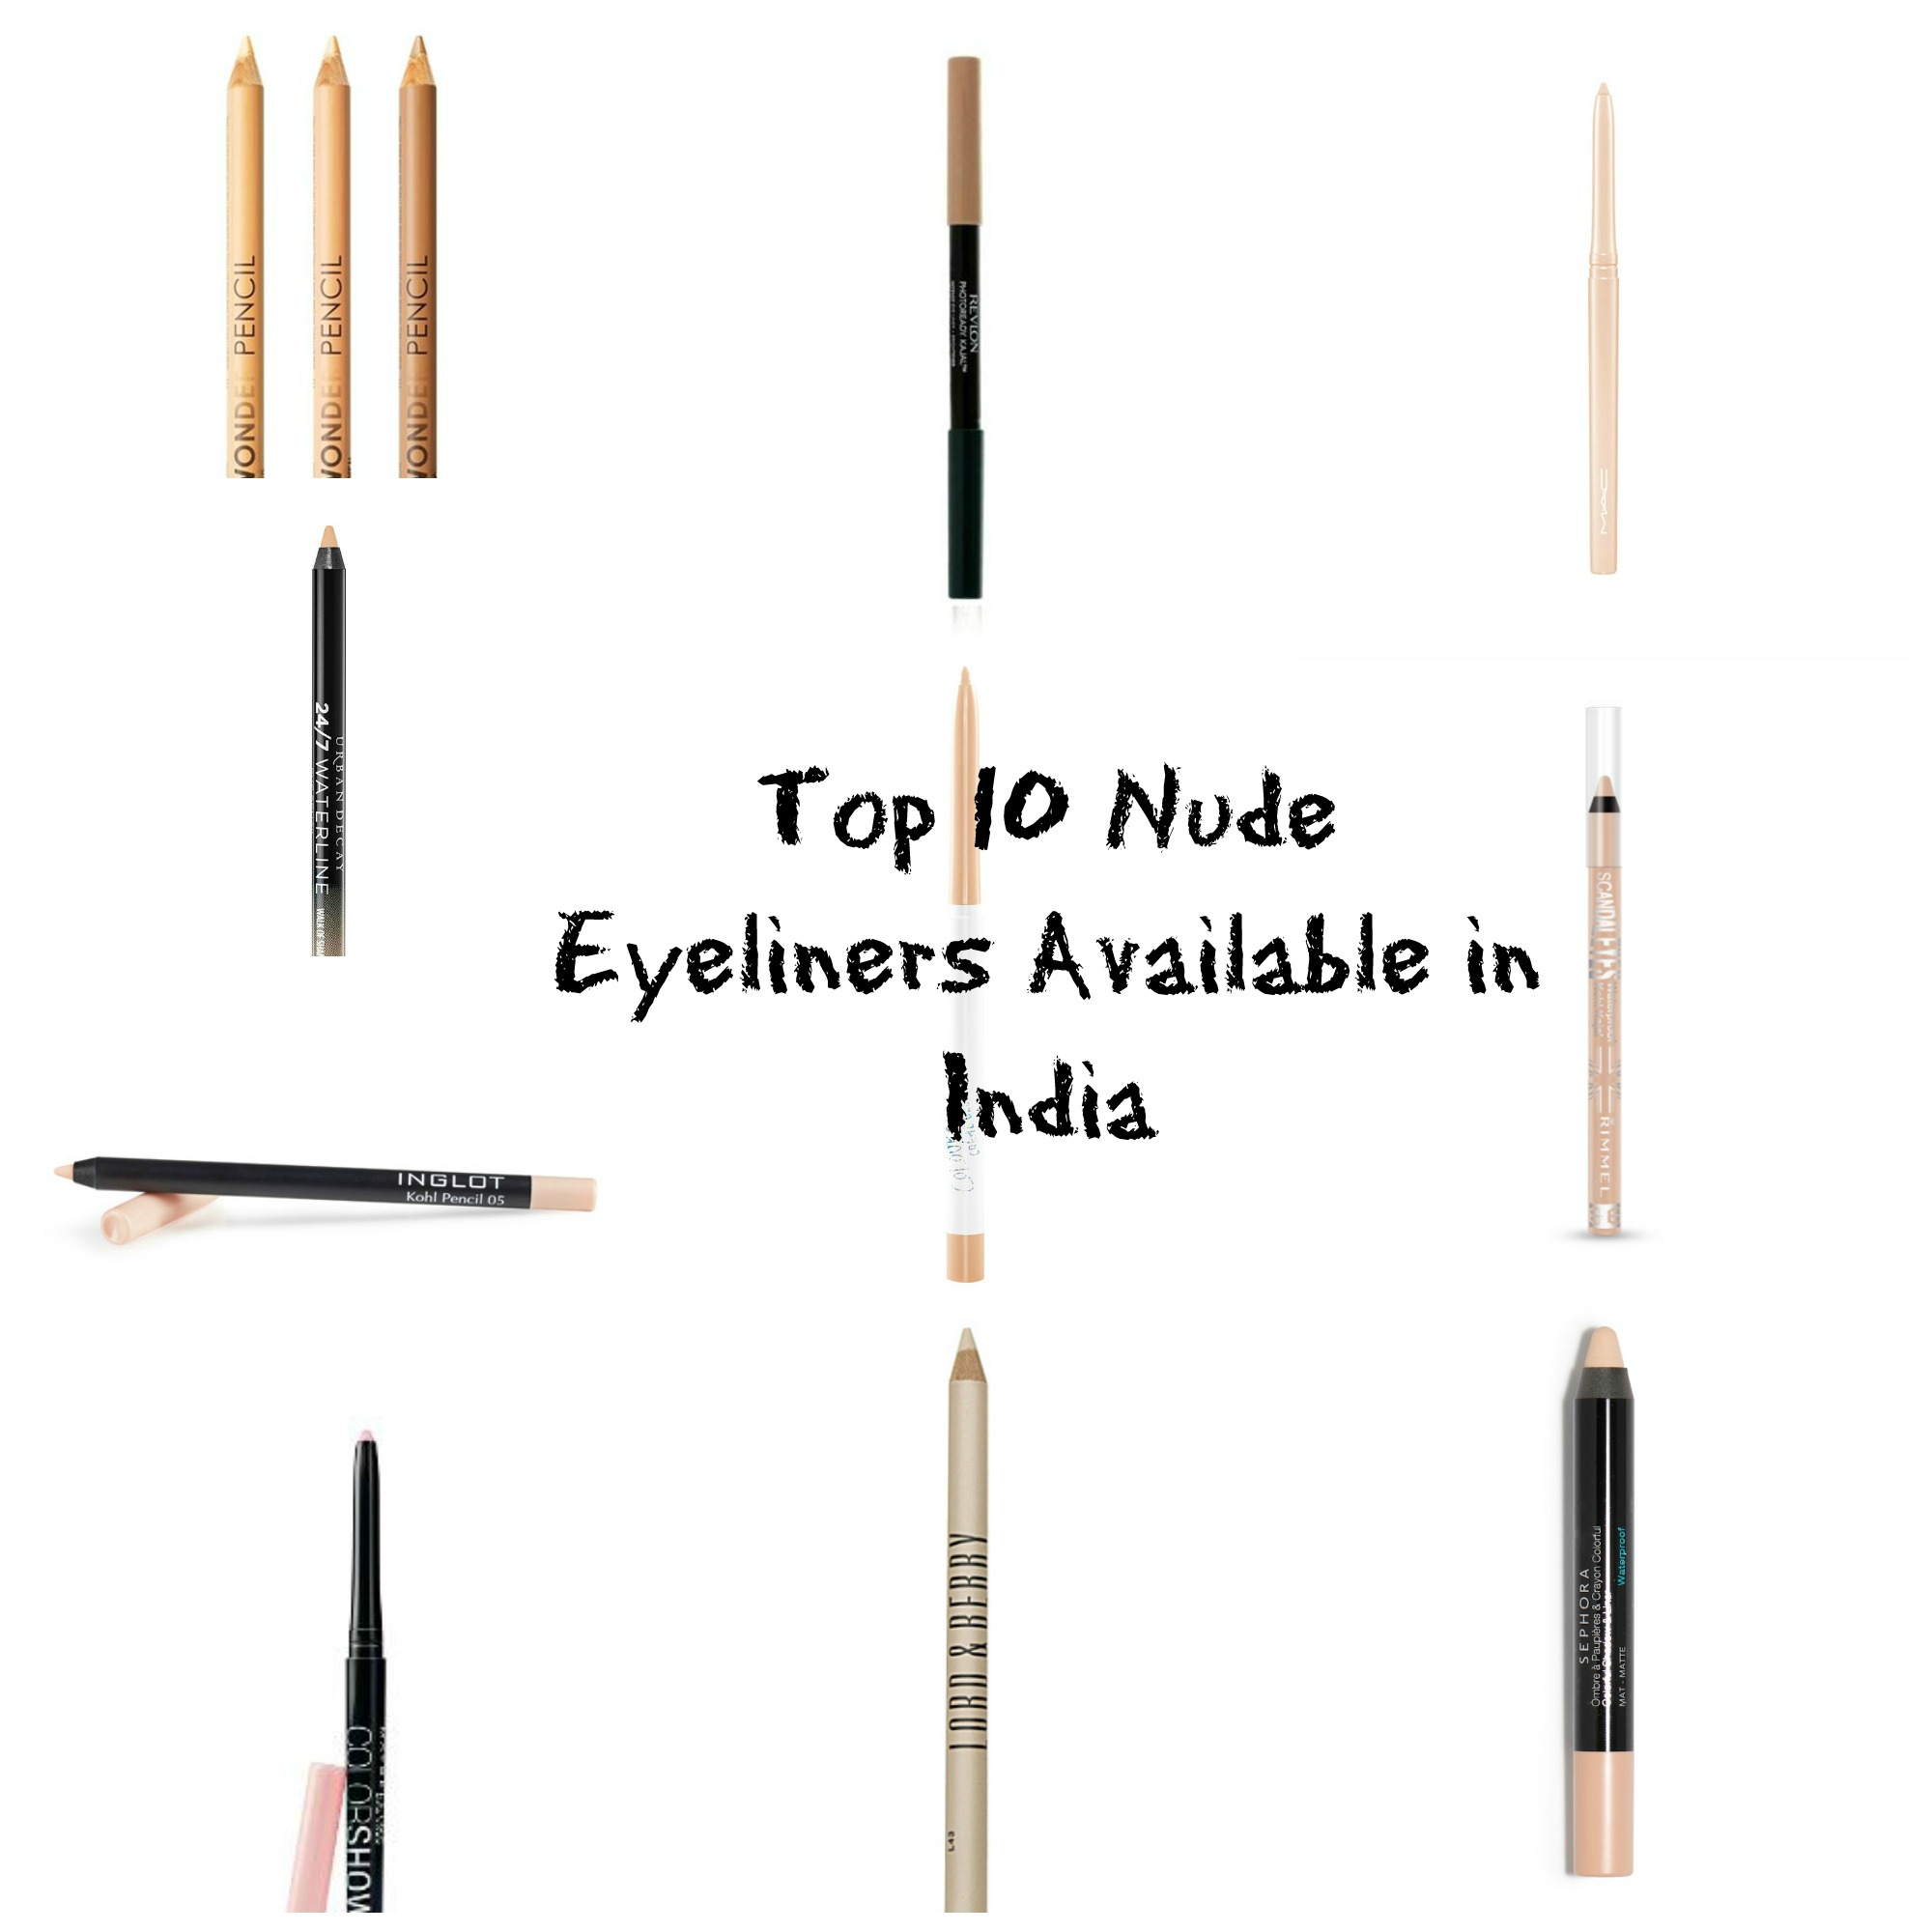 Agent Kilimanjaro Sump Top 10 Nude/Beige Eyeliners Available in India, Prices - New Love - Makeup